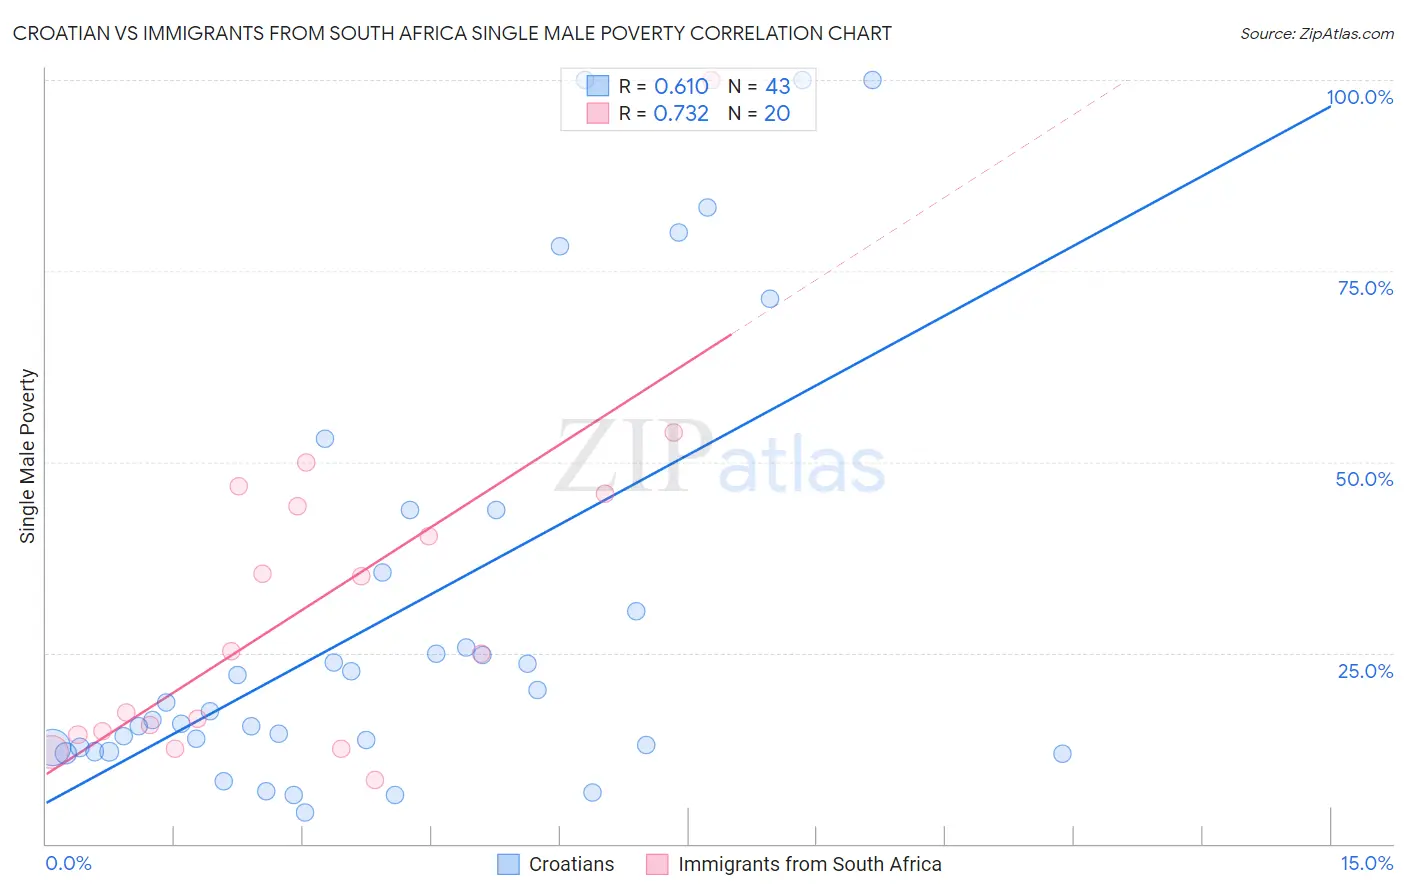 Croatian vs Immigrants from South Africa Single Male Poverty